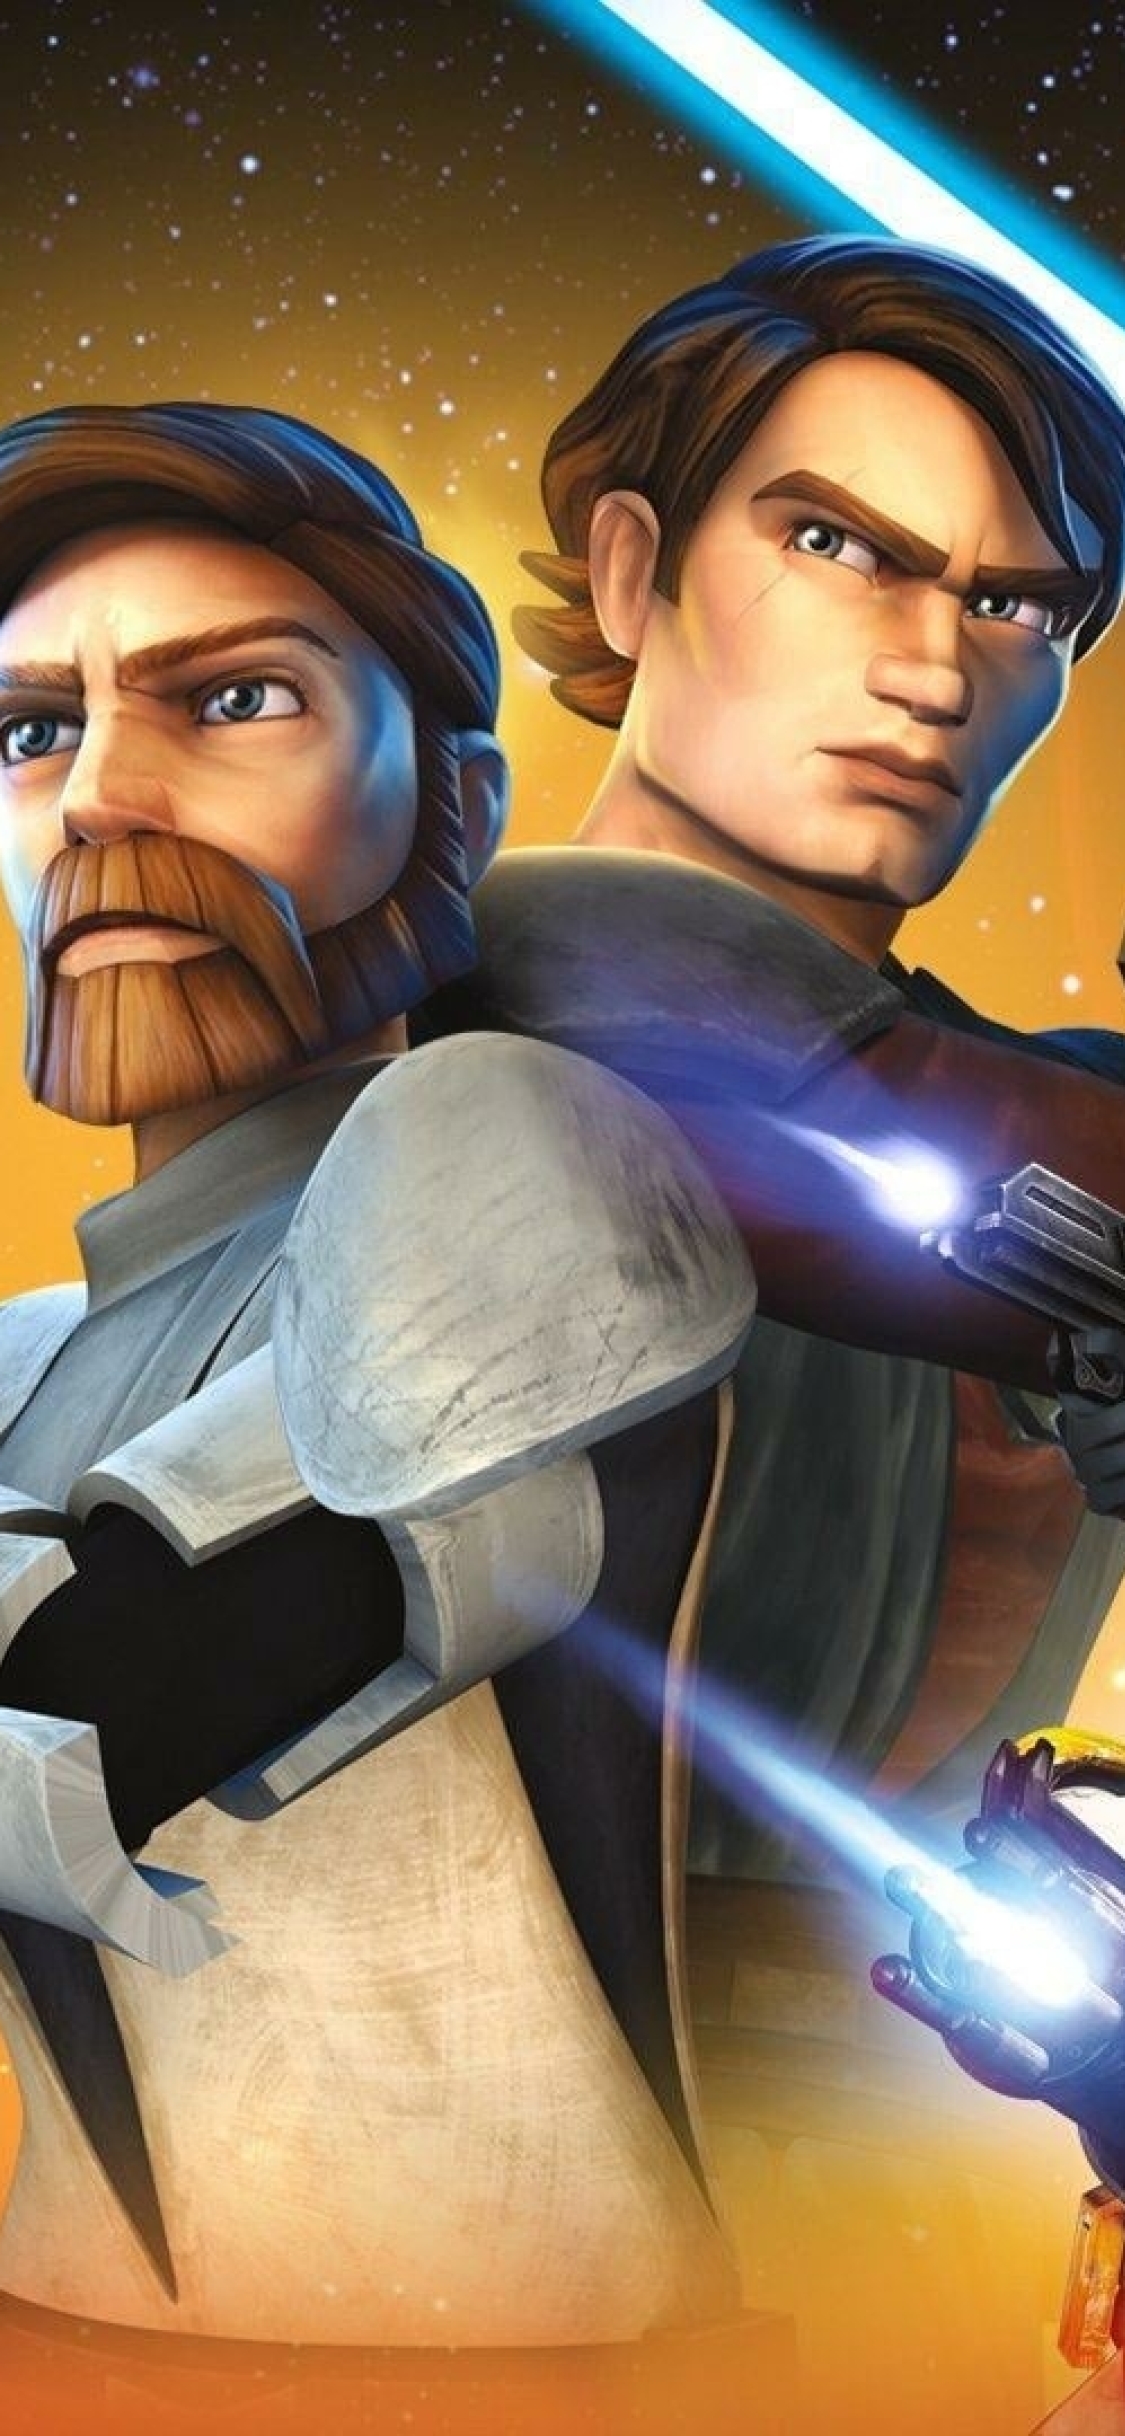 1125x2436 Star Wars The Clone Wars Season 7 Iphone Xs Iphone 10 Iphone X Wallpaper Hd Tv Series 4k Wallpapers Images Photos And Background